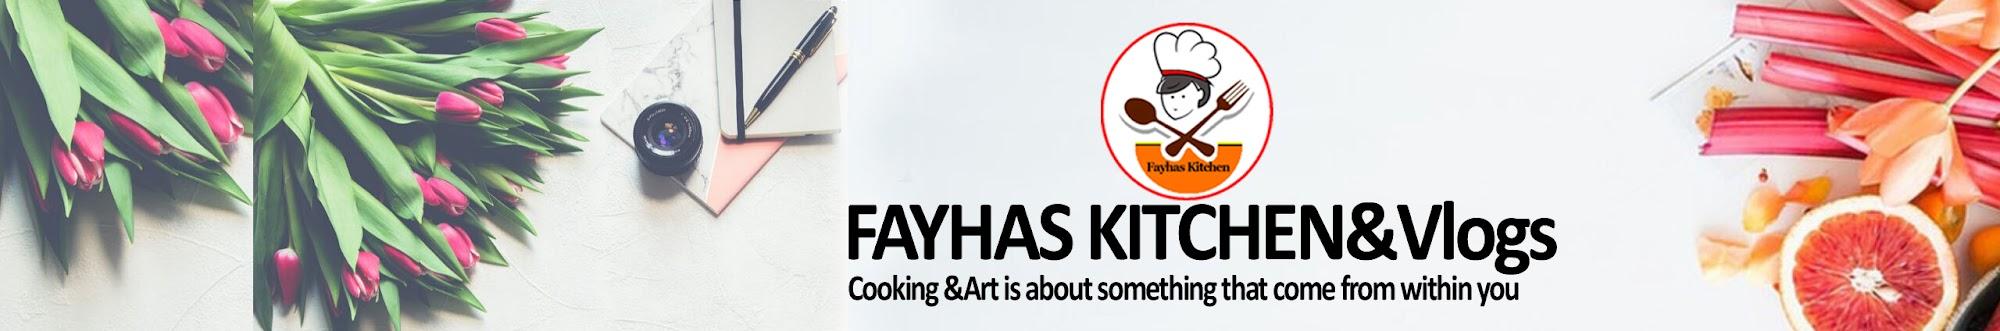 Fayhas Kitchen and Vlogs